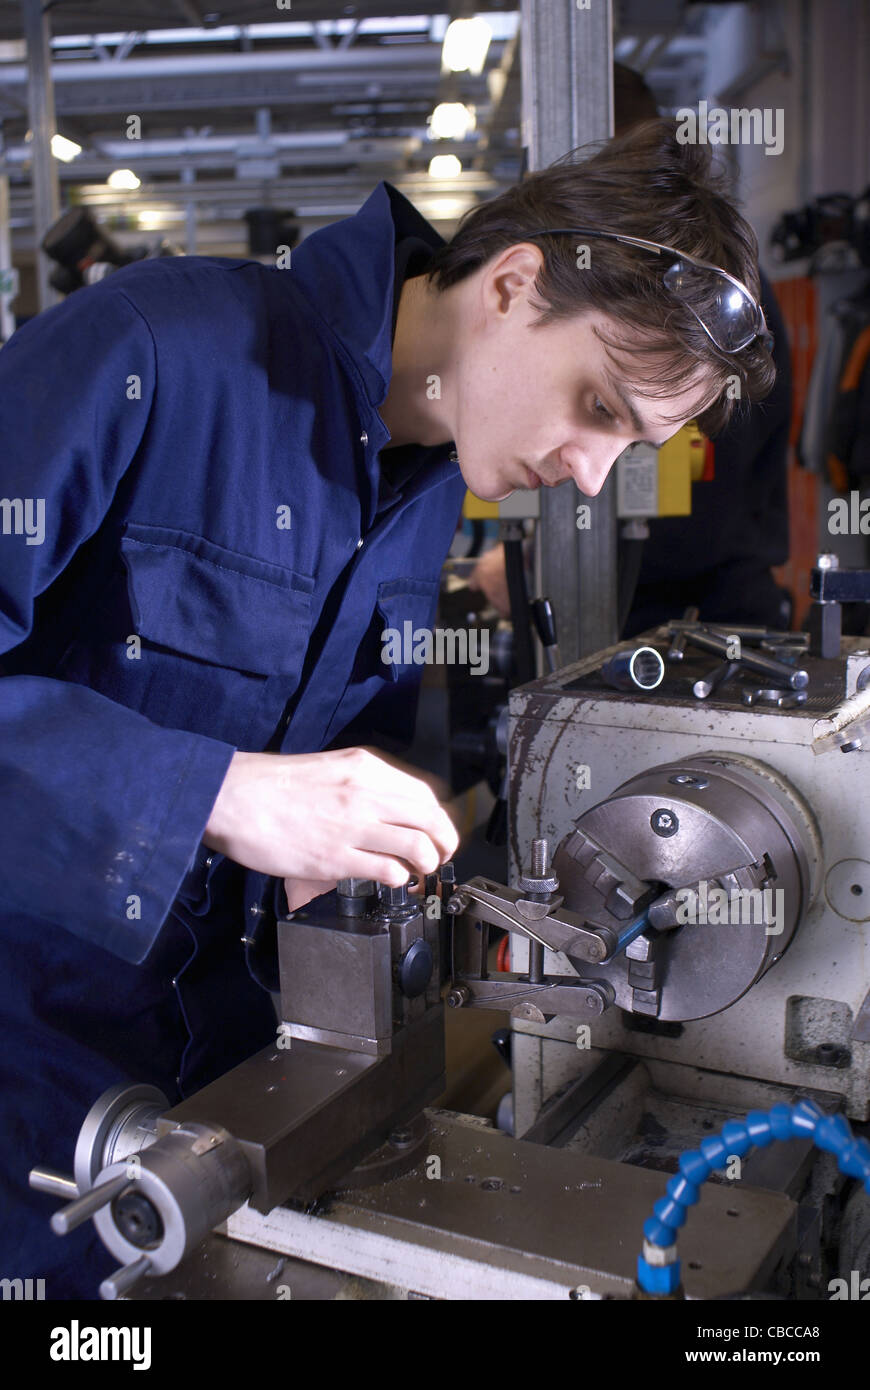 Student at work in shop class Stock Photo